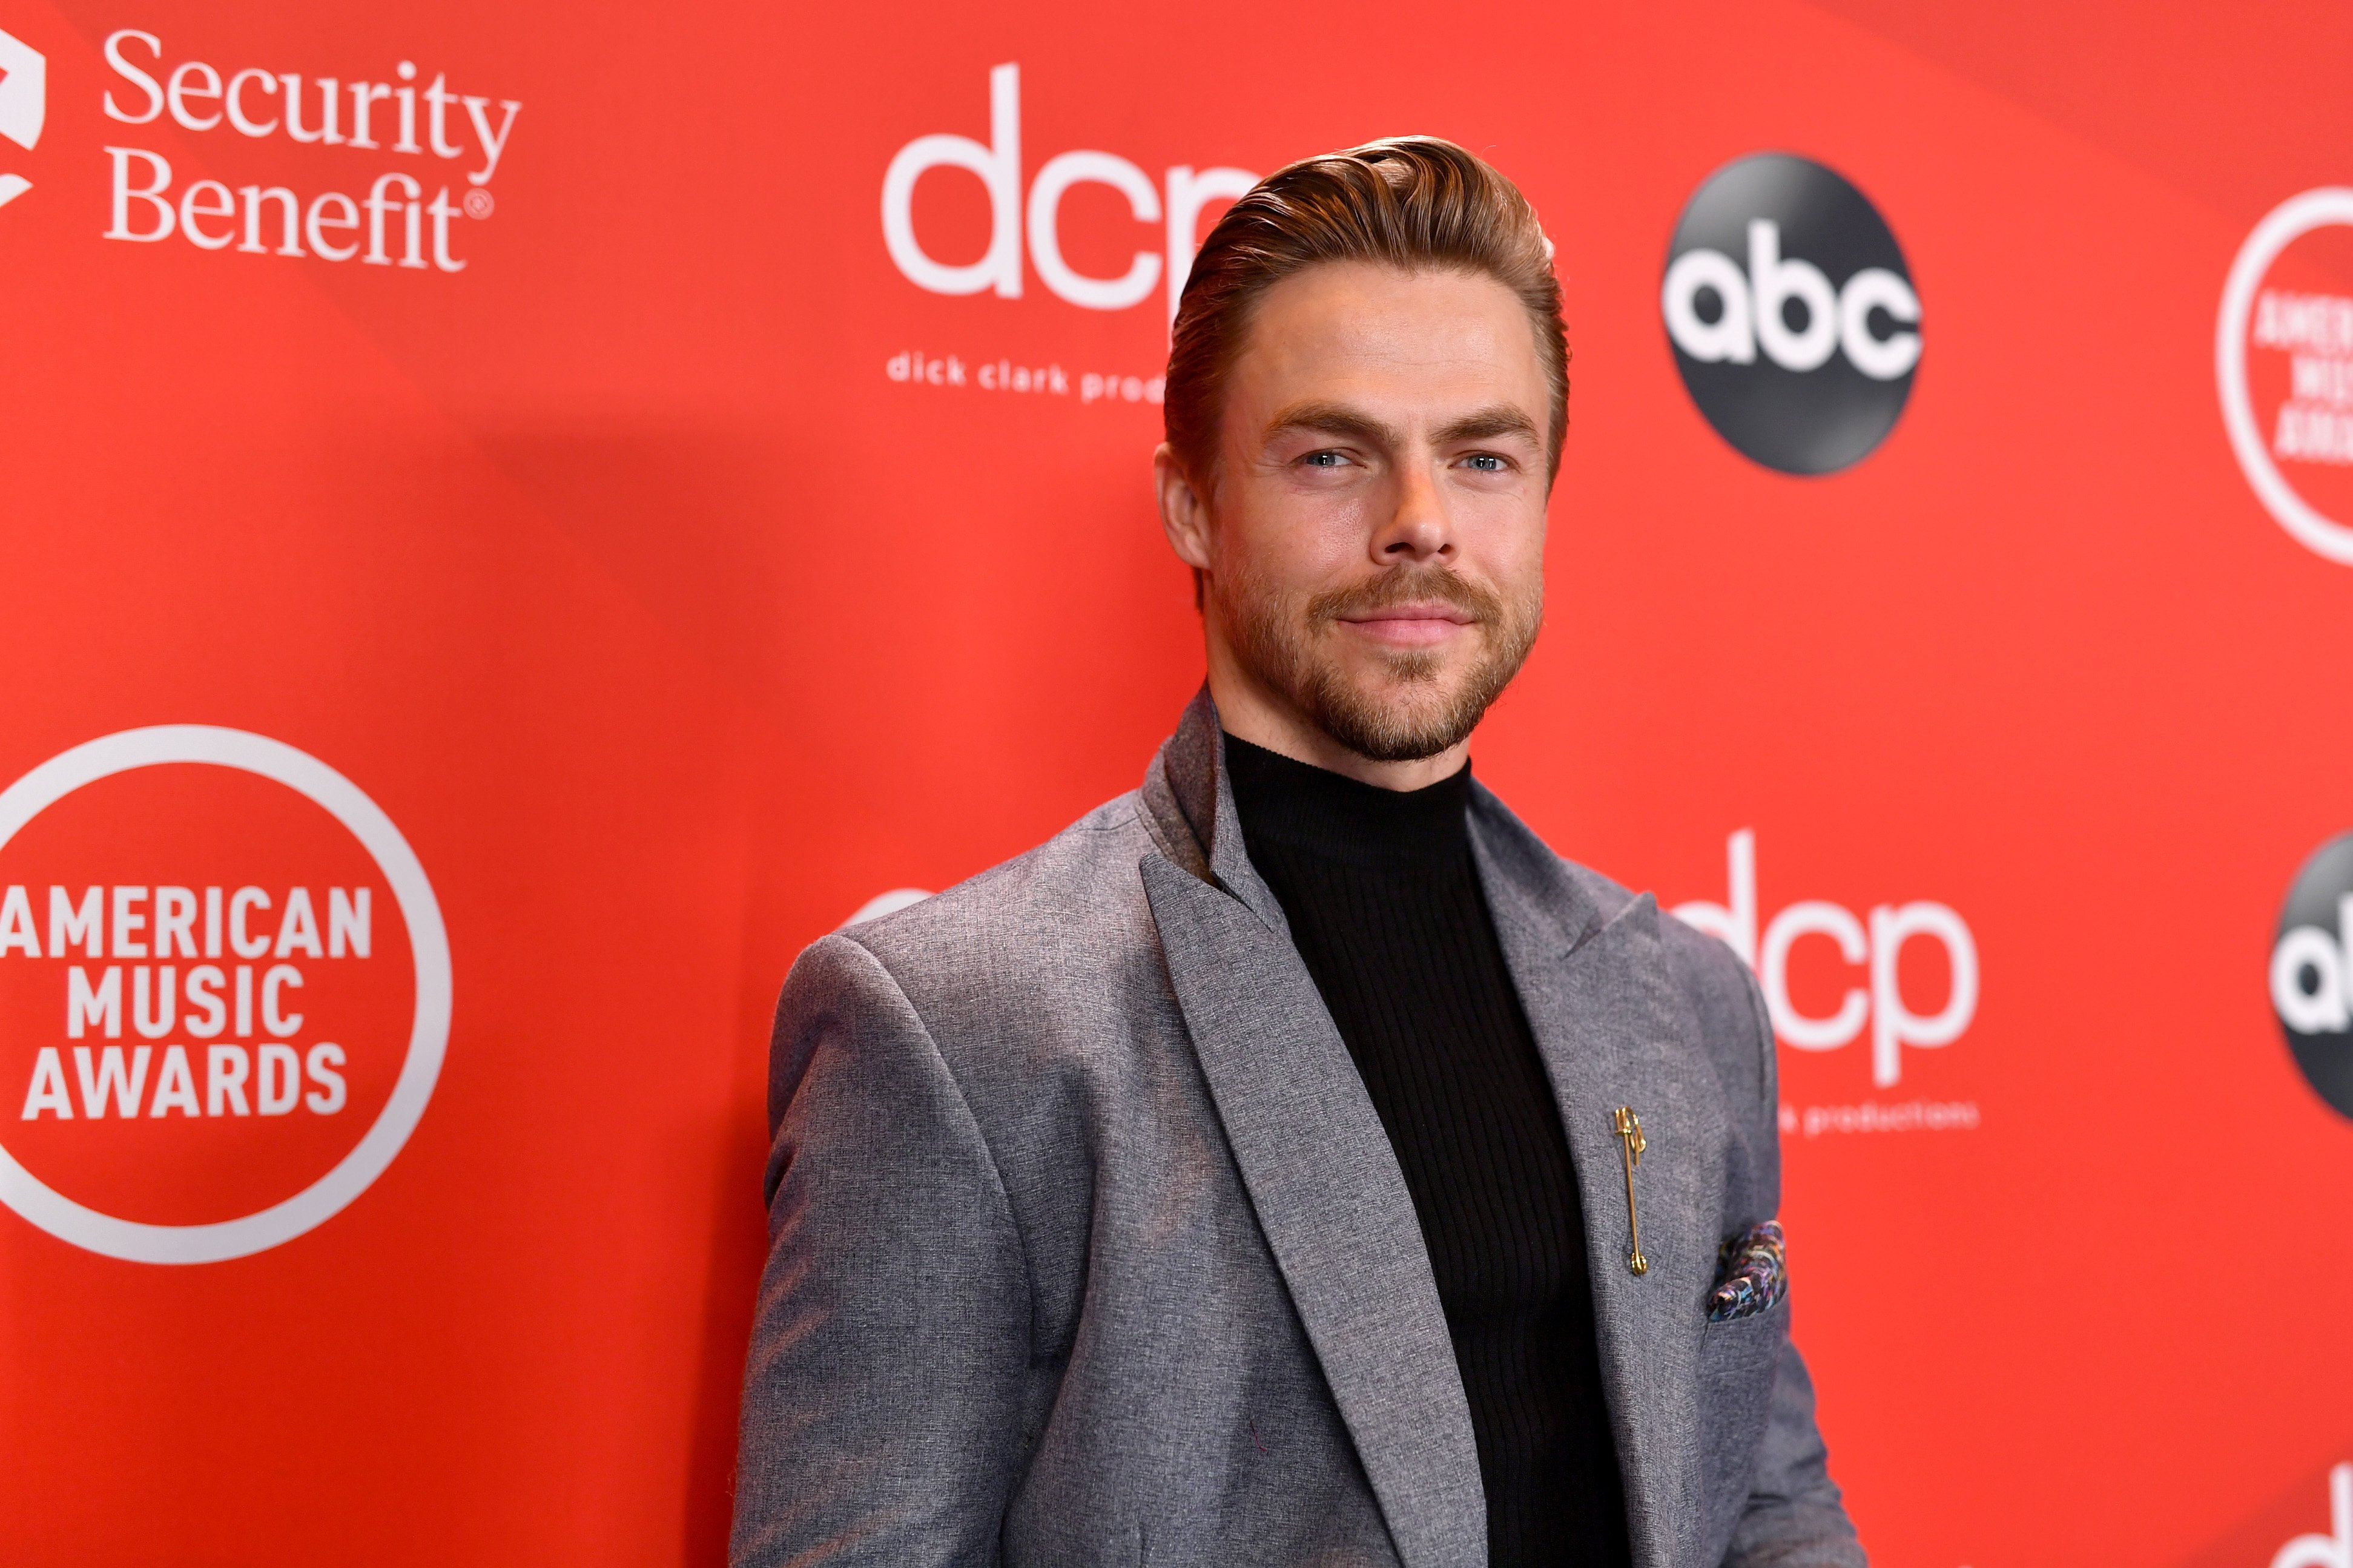 Derek Hough attends the 2020 American Music Awards at Microsoft Theater